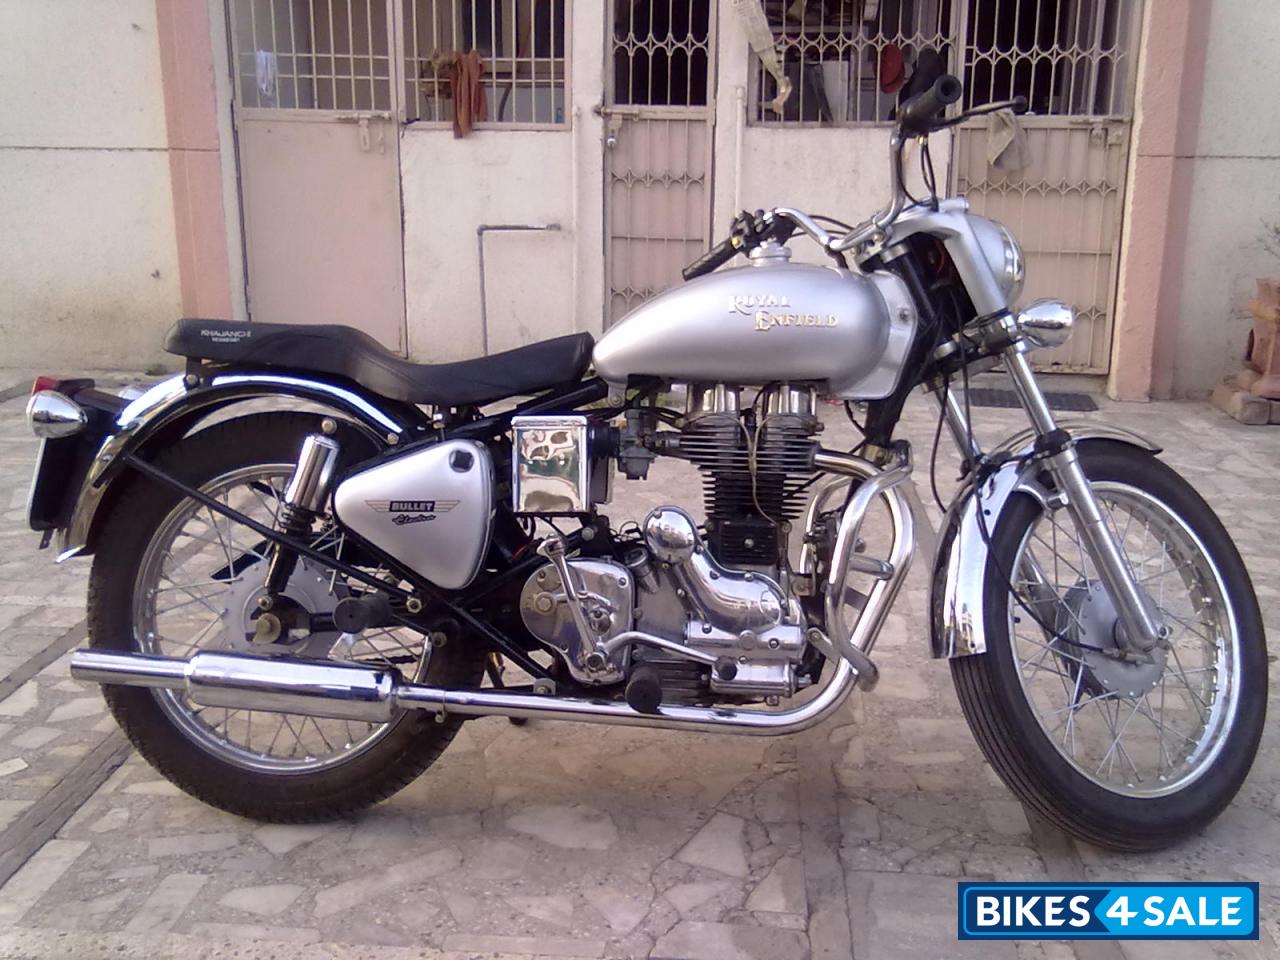 Used 1990 model Royal Enfield Bullet Standard 350 for sale in Bhopal. ID 42958. Silver colour 